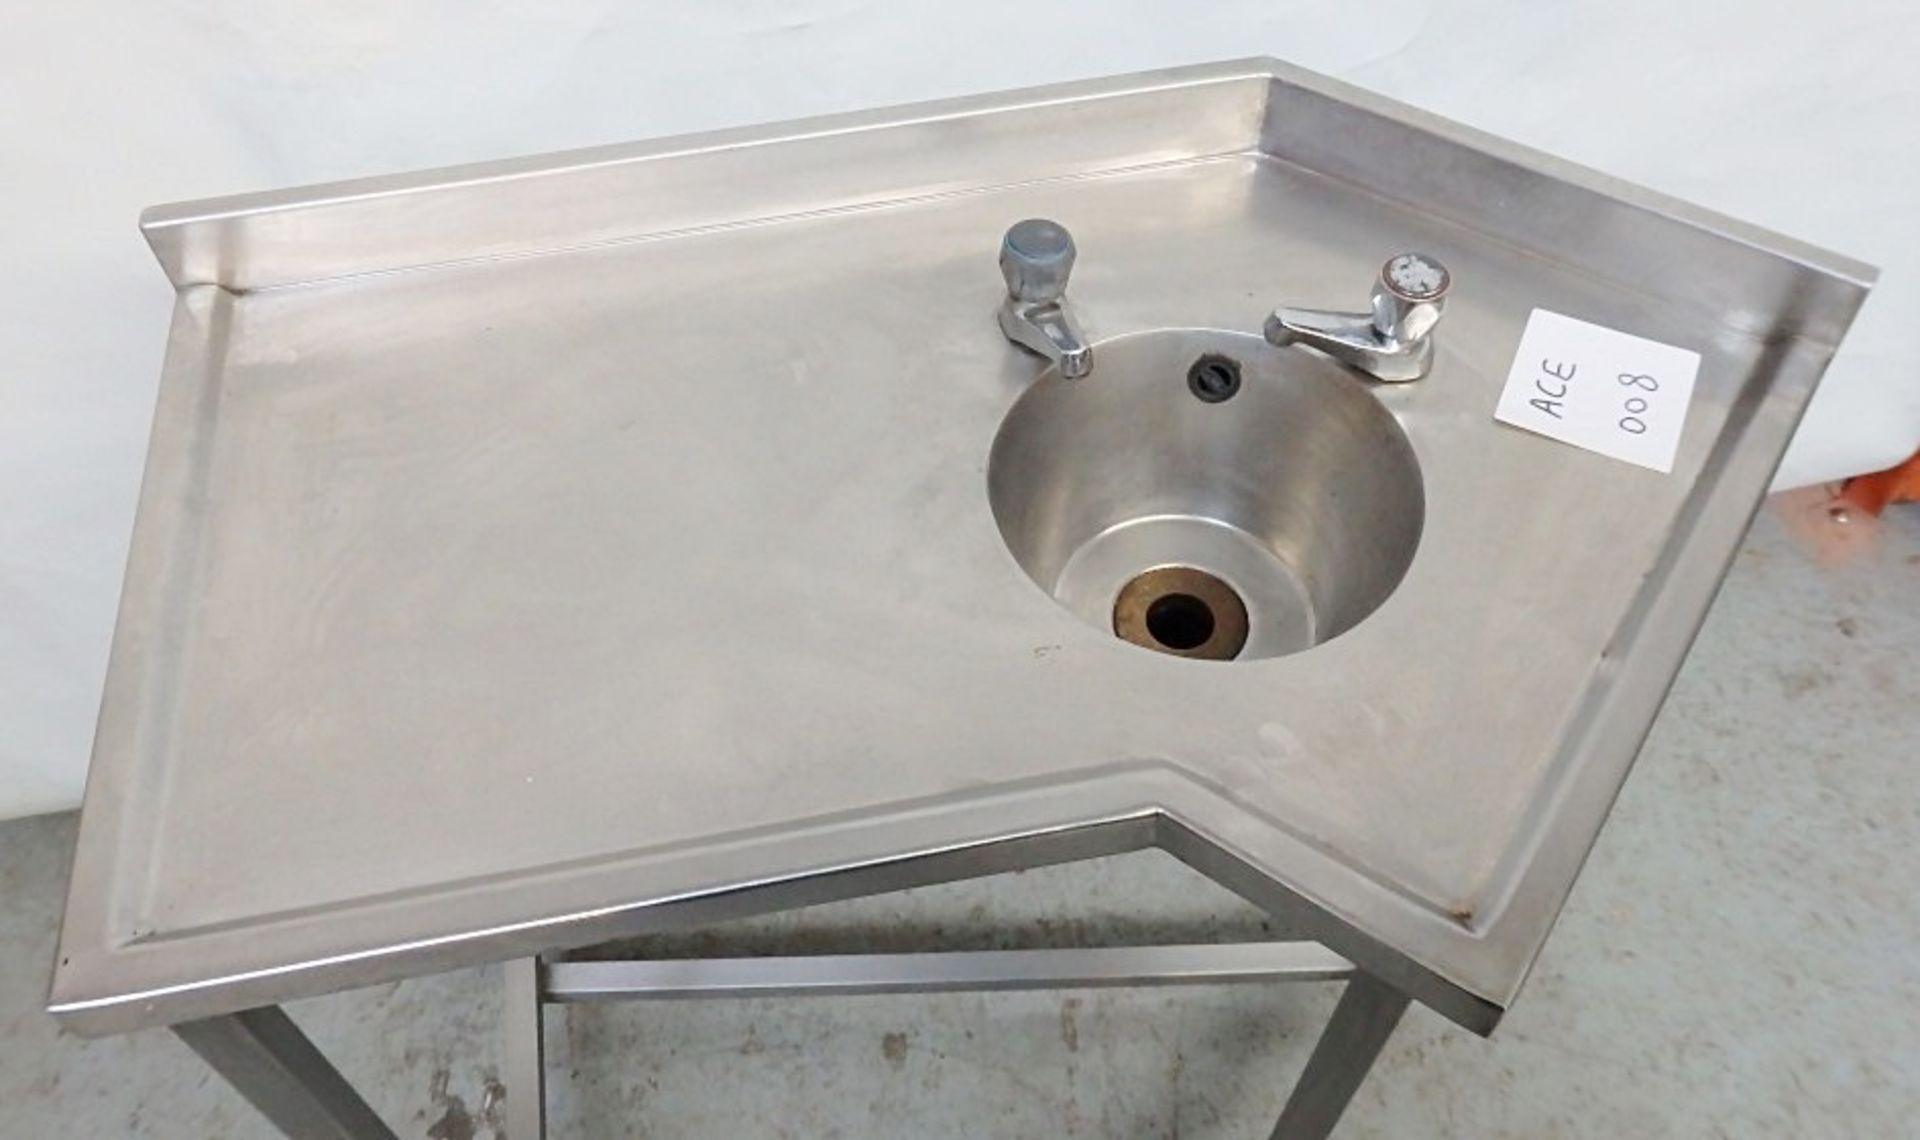 1 x Stainless Steel Free-standing Sink Basin Unit With Hot and Cold Taps - H87 x W130 x D50 cms - - Image 3 of 4